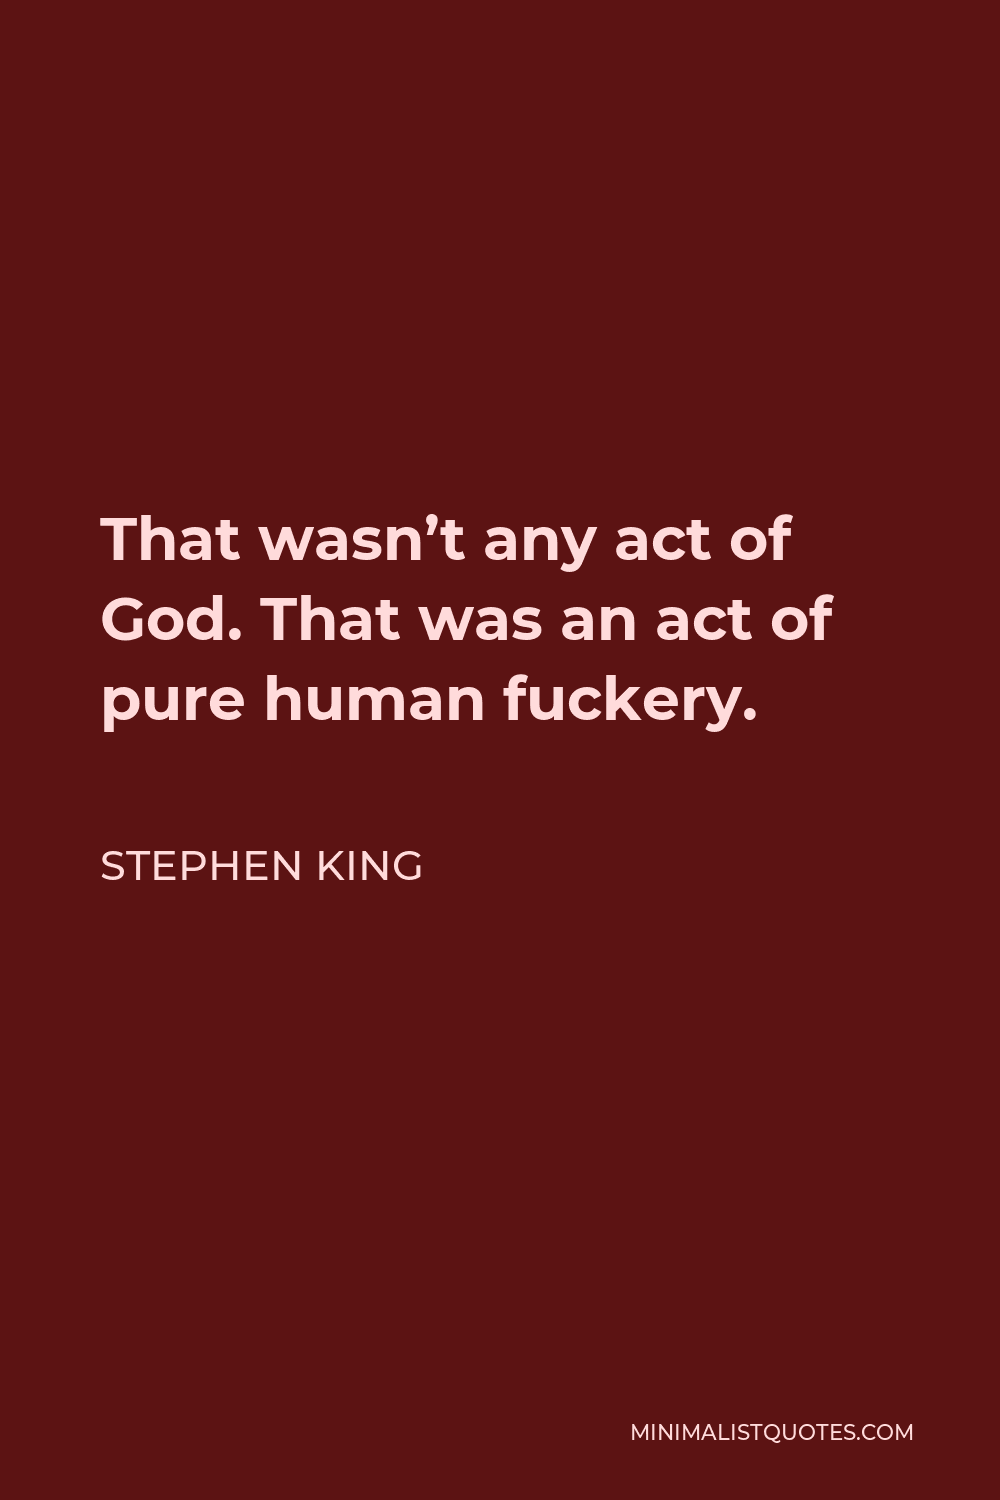 Stephen King Quote - That wasn’t any act of God. That was an act of pure human fuckery.